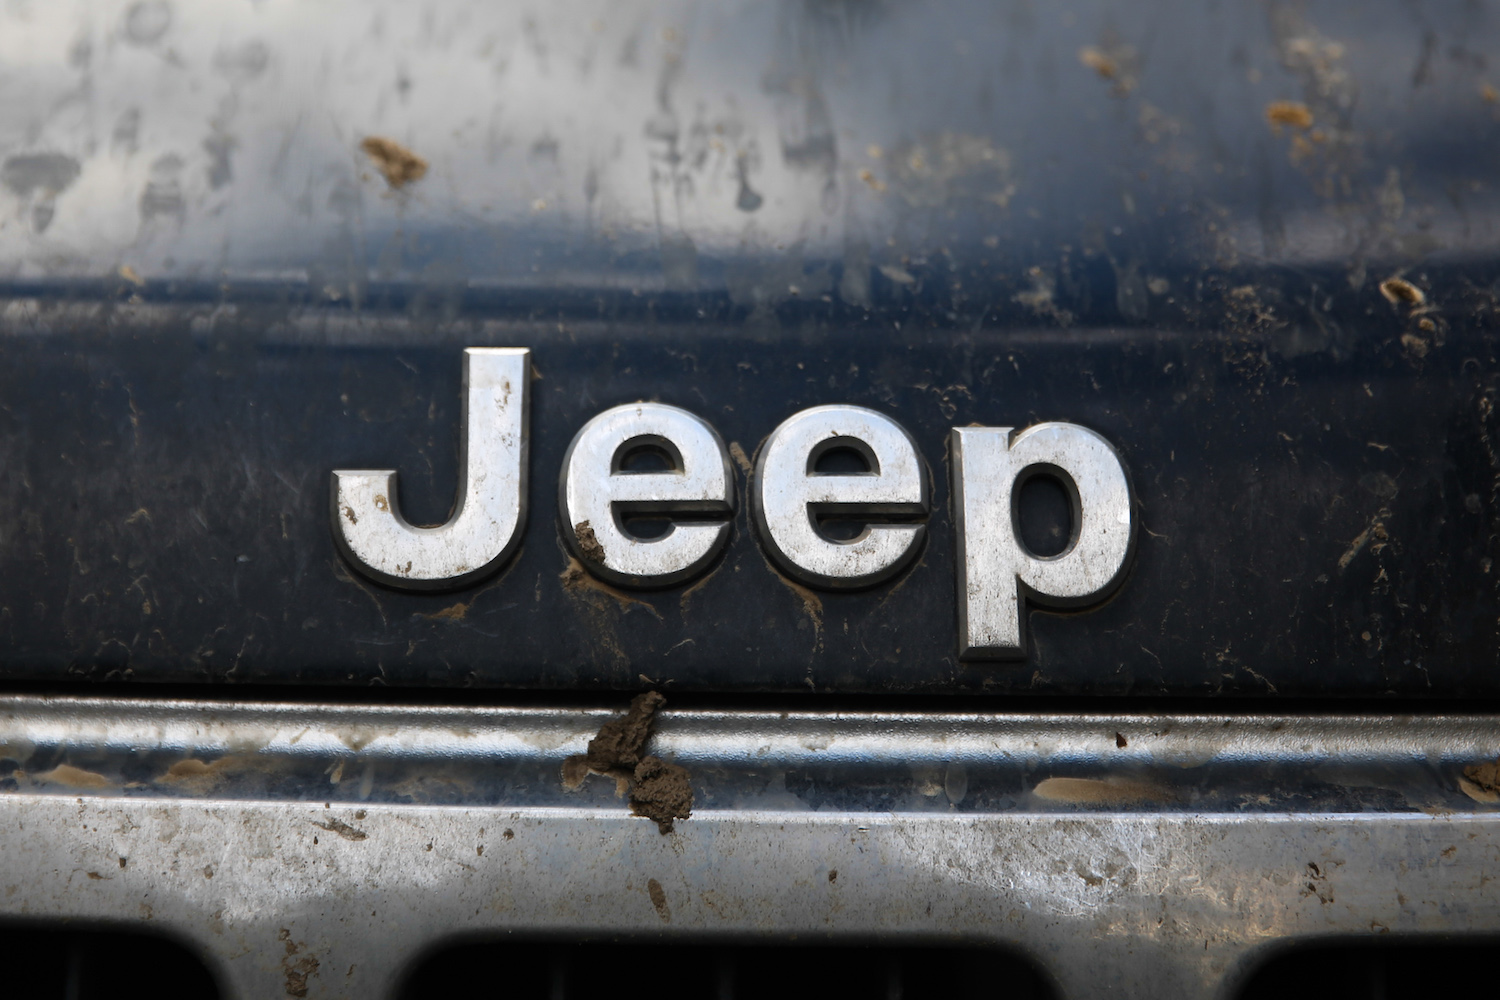 A muddy Jeep logo depicting a trademarked SUV badge.